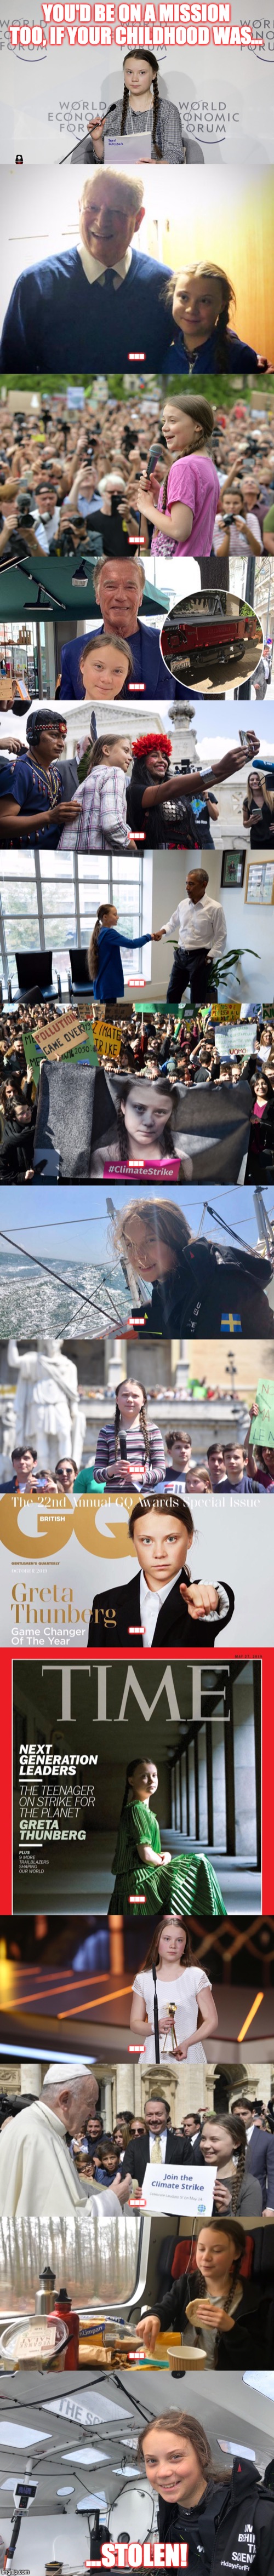 How dare you! | YOU'D BE ON A MISSION TOO, IF YOUR CHILDHOOD WAS... ... ... ... ... ... ... ... ... ... ... ... ... ... ...STOLEN! | image tagged in greta thunberg how dare you | made w/ Imgflip meme maker